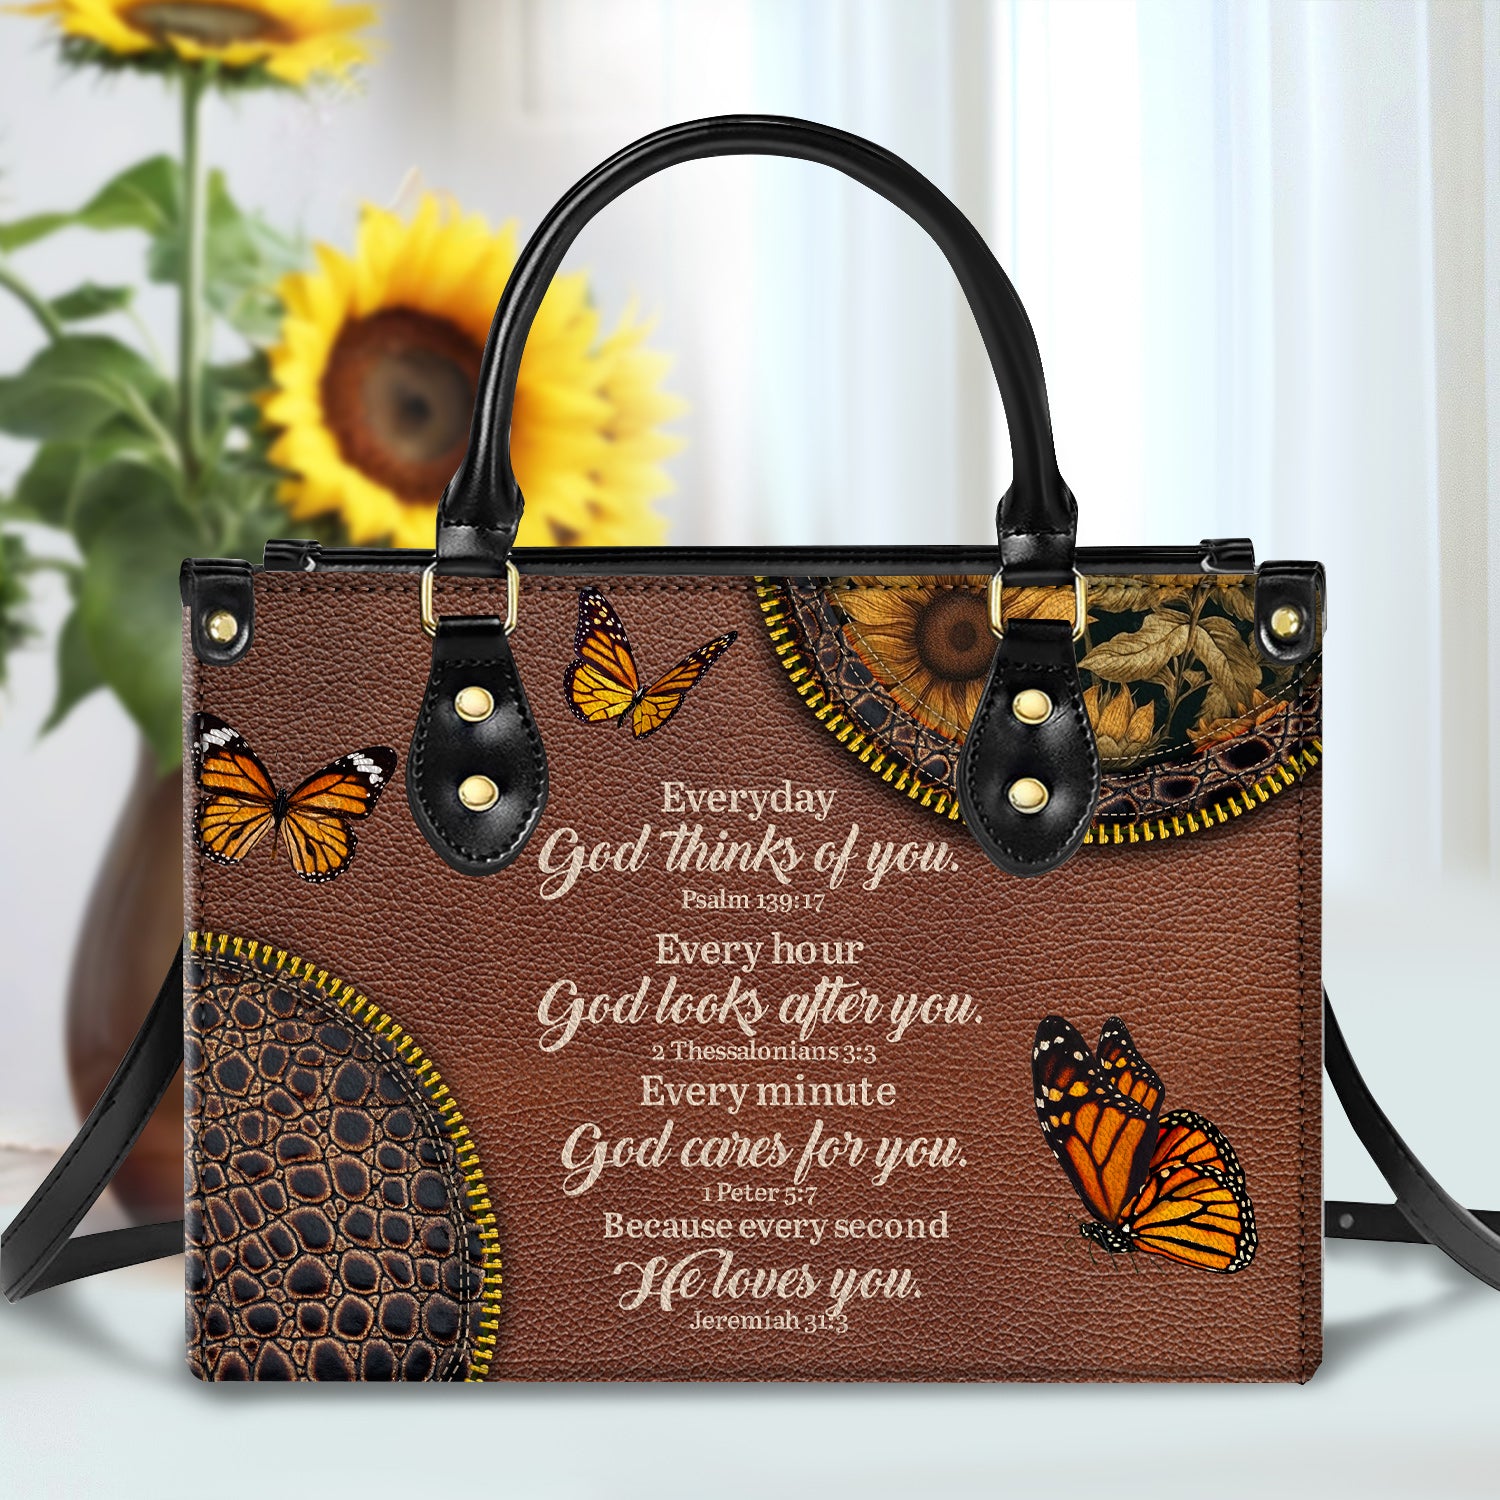 God Loves You Leather Handbag Christian Gifts Bible Verses Religious Gifts